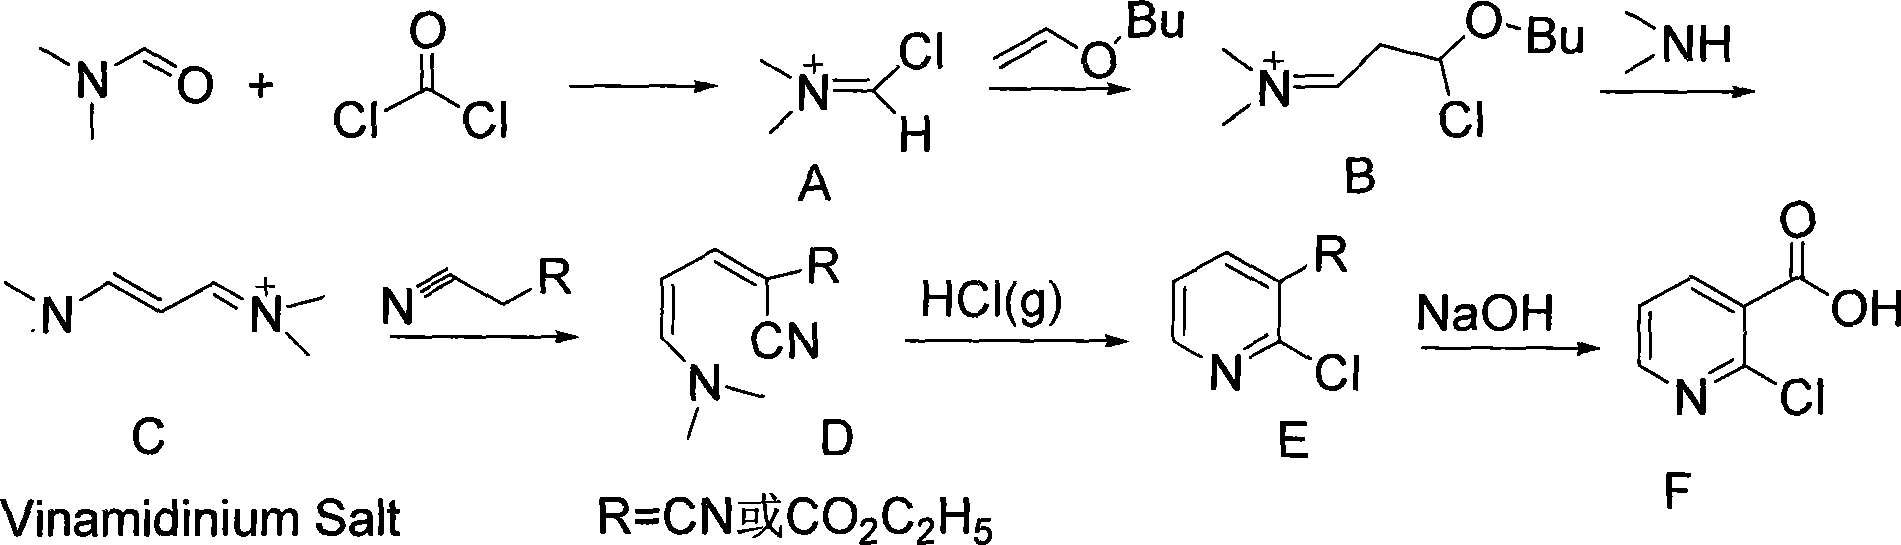 Synthesis of 2-chlorine apellagrin